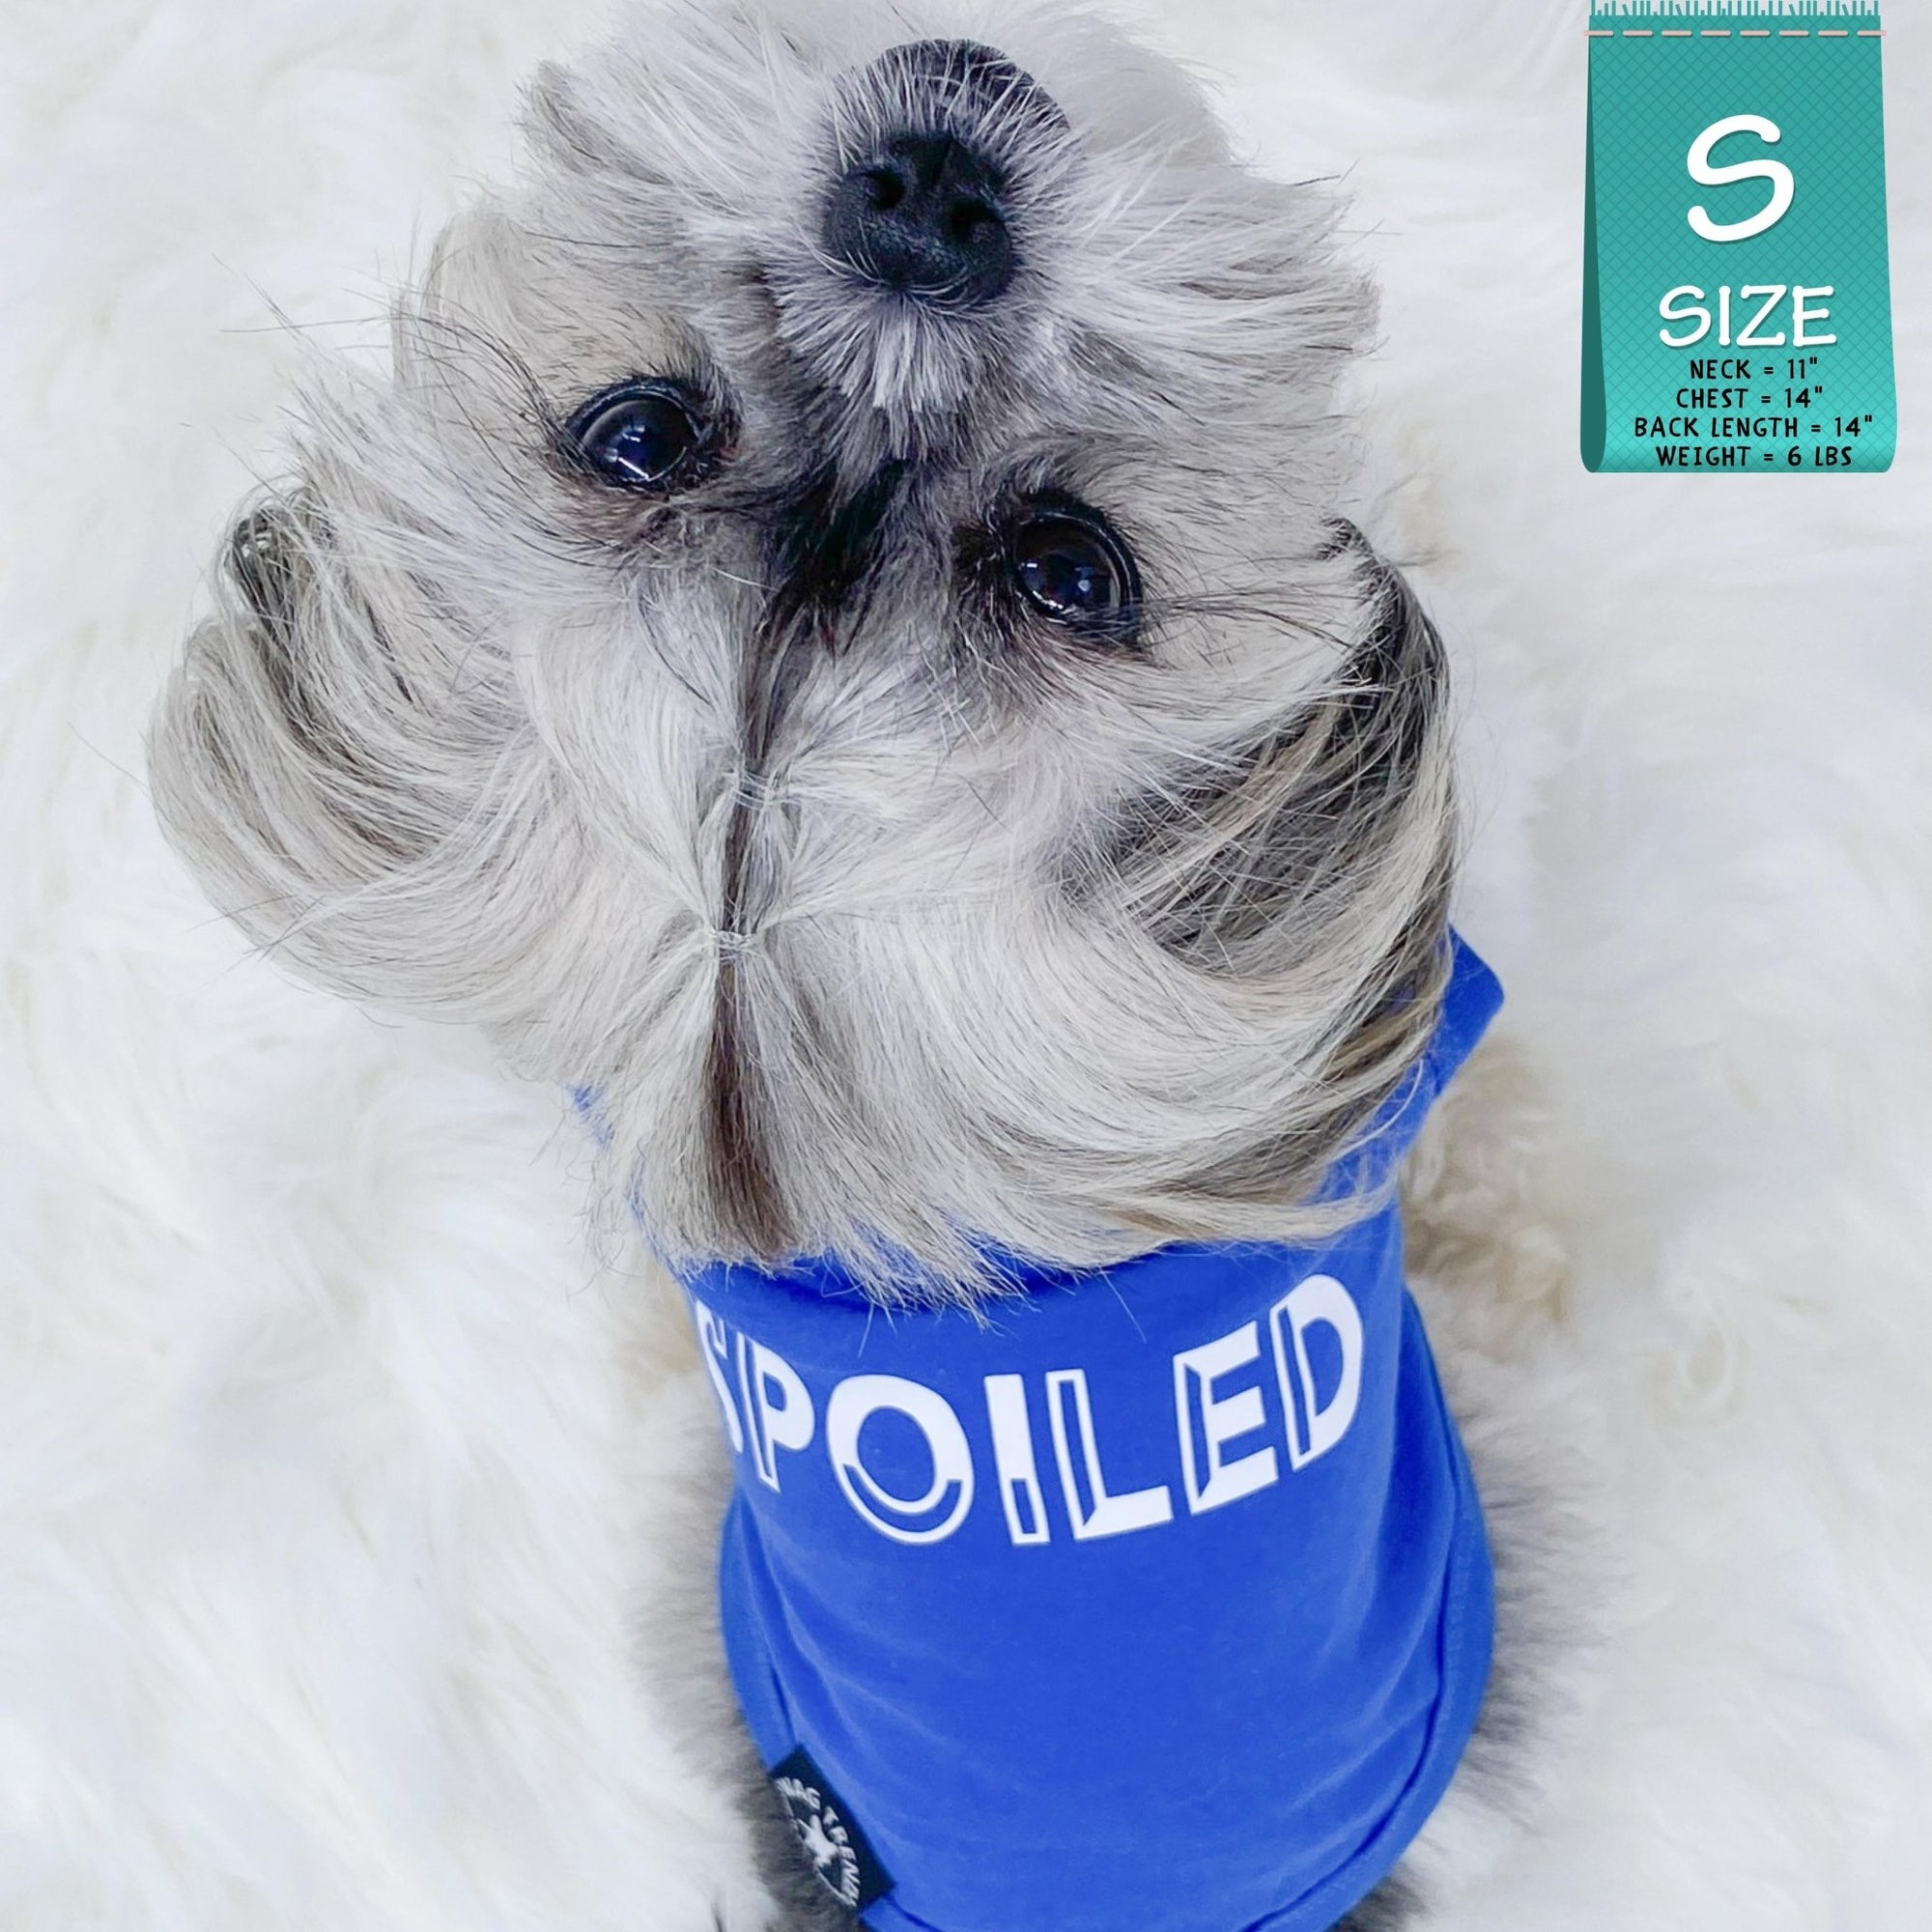 Dog T-Shirt - Shih Tzu mix wearing &quot;Spoiled&quot; dog t-shirt in royal blue with a SPOILED lettering in white - against solid white background - Wag Trendz